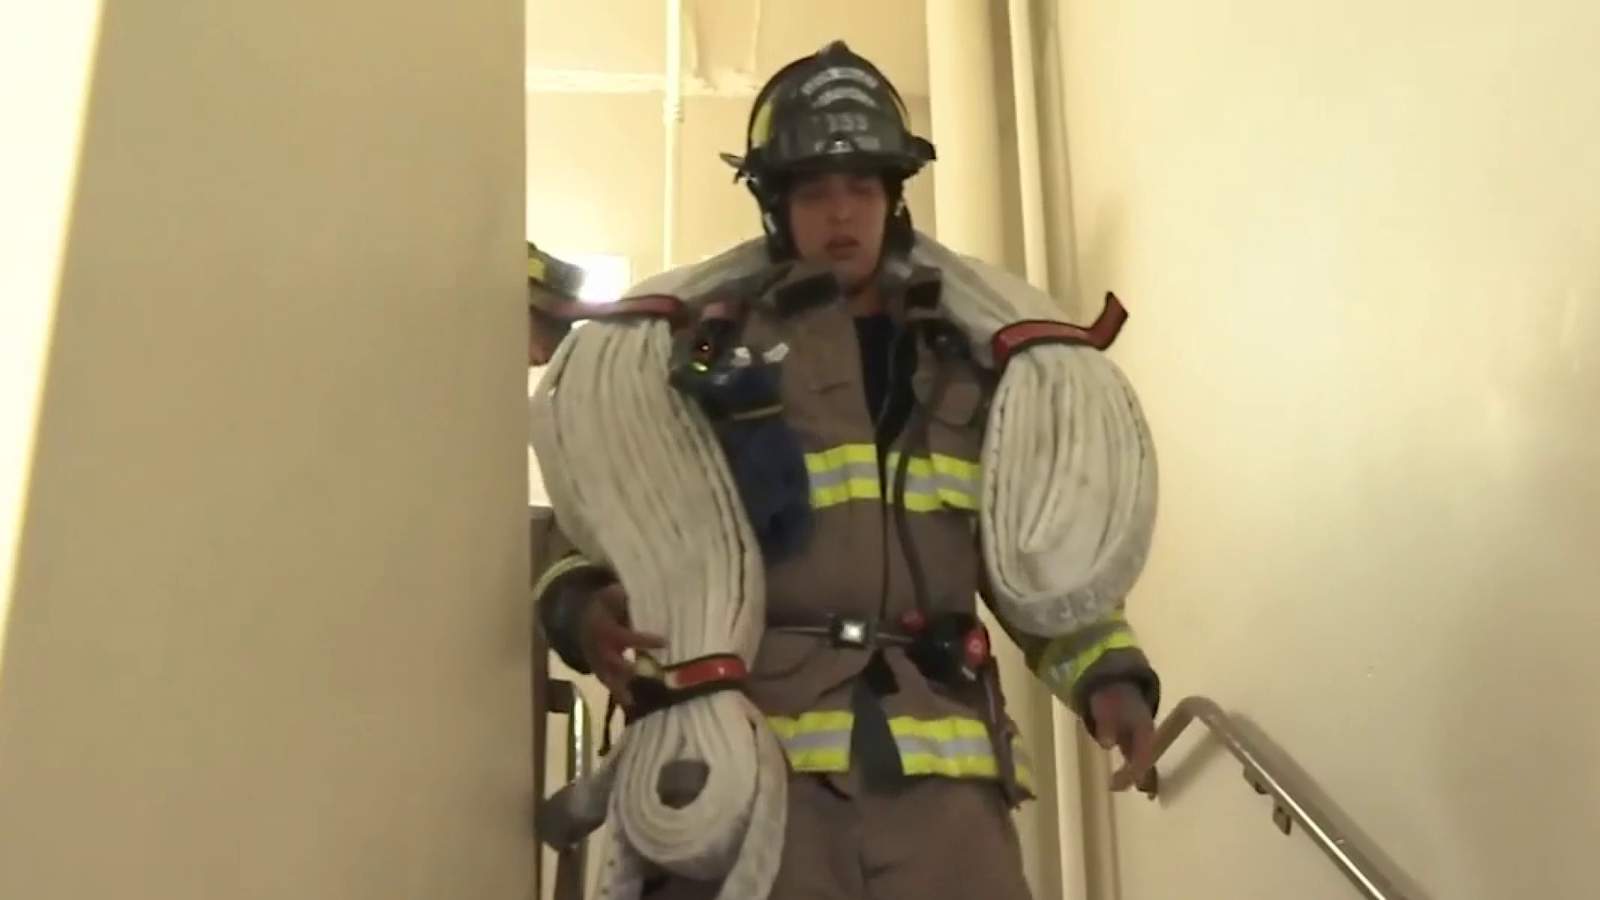 Leon Valley first responders climb flights of stairs on 9/11